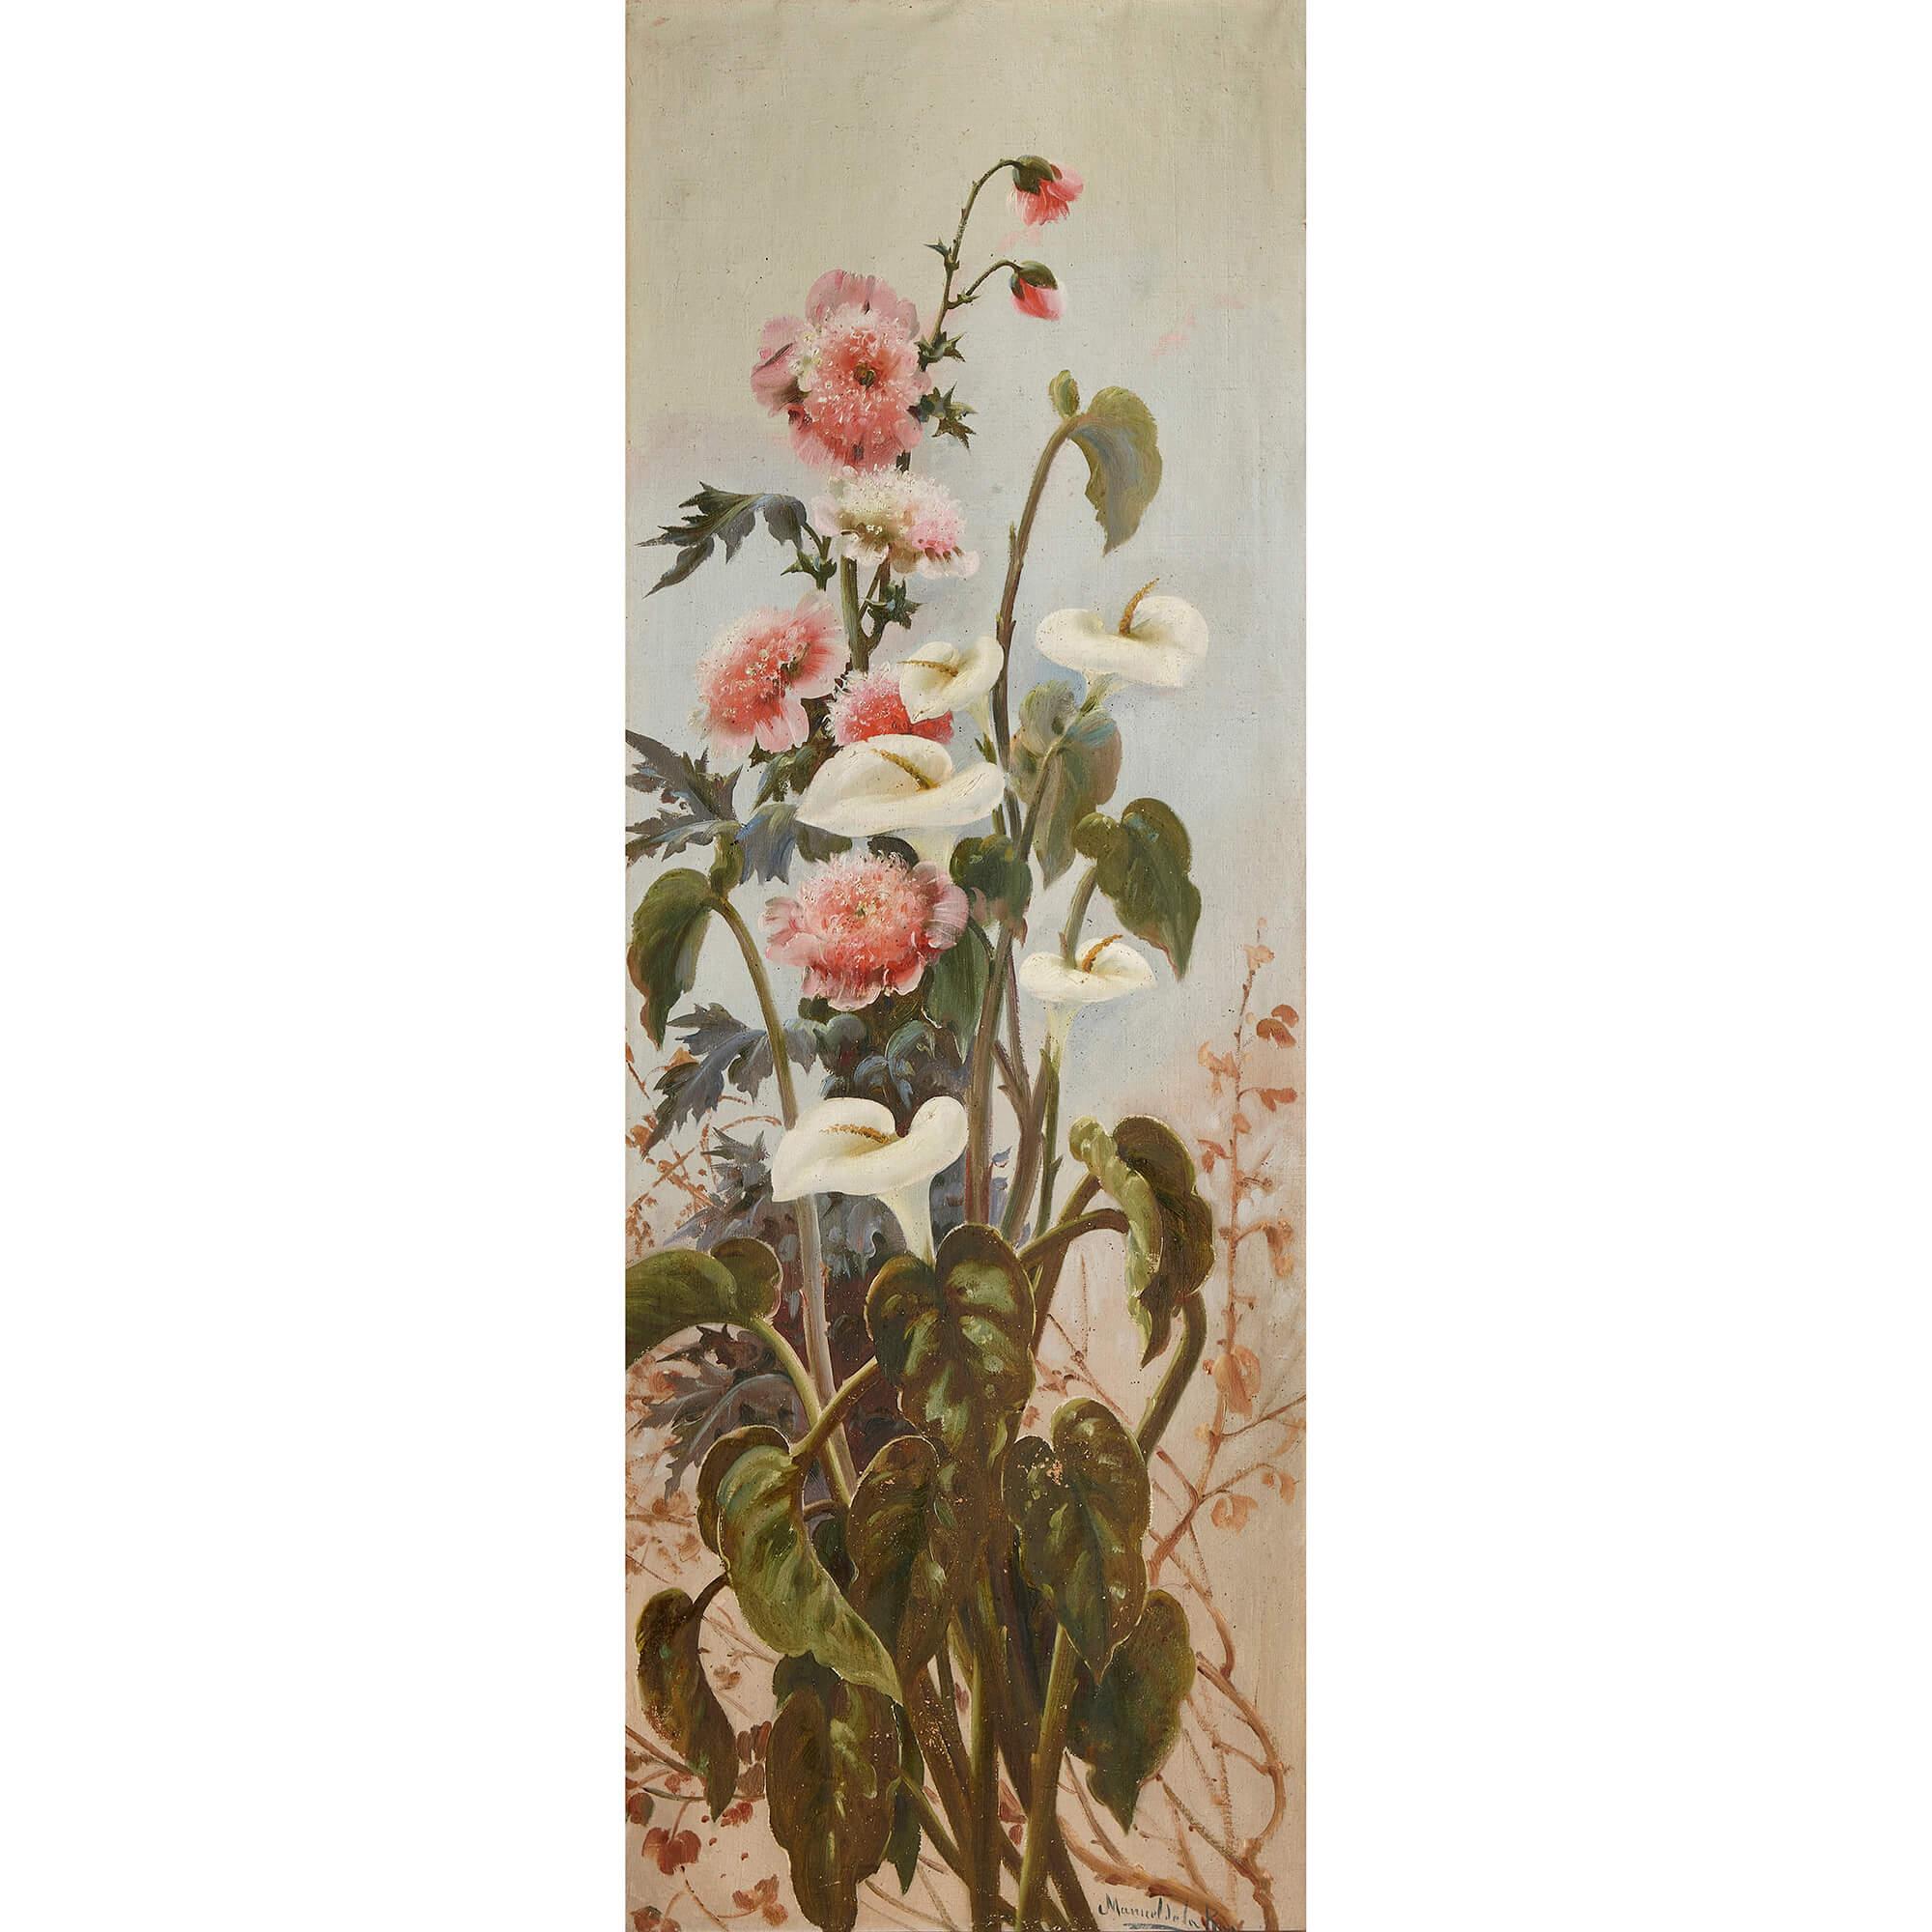 Large Spanish painting of flowers by Manuel de la Rosa
Spanish, Late 19th Century 
Frame: Height 146cm, width 67cm, depth 7cm
Canvas: Height 126cm, width 46cm

Painted by Manuel de la Rosa (Spanish, 1860-1924), this oil on canvas depicts a